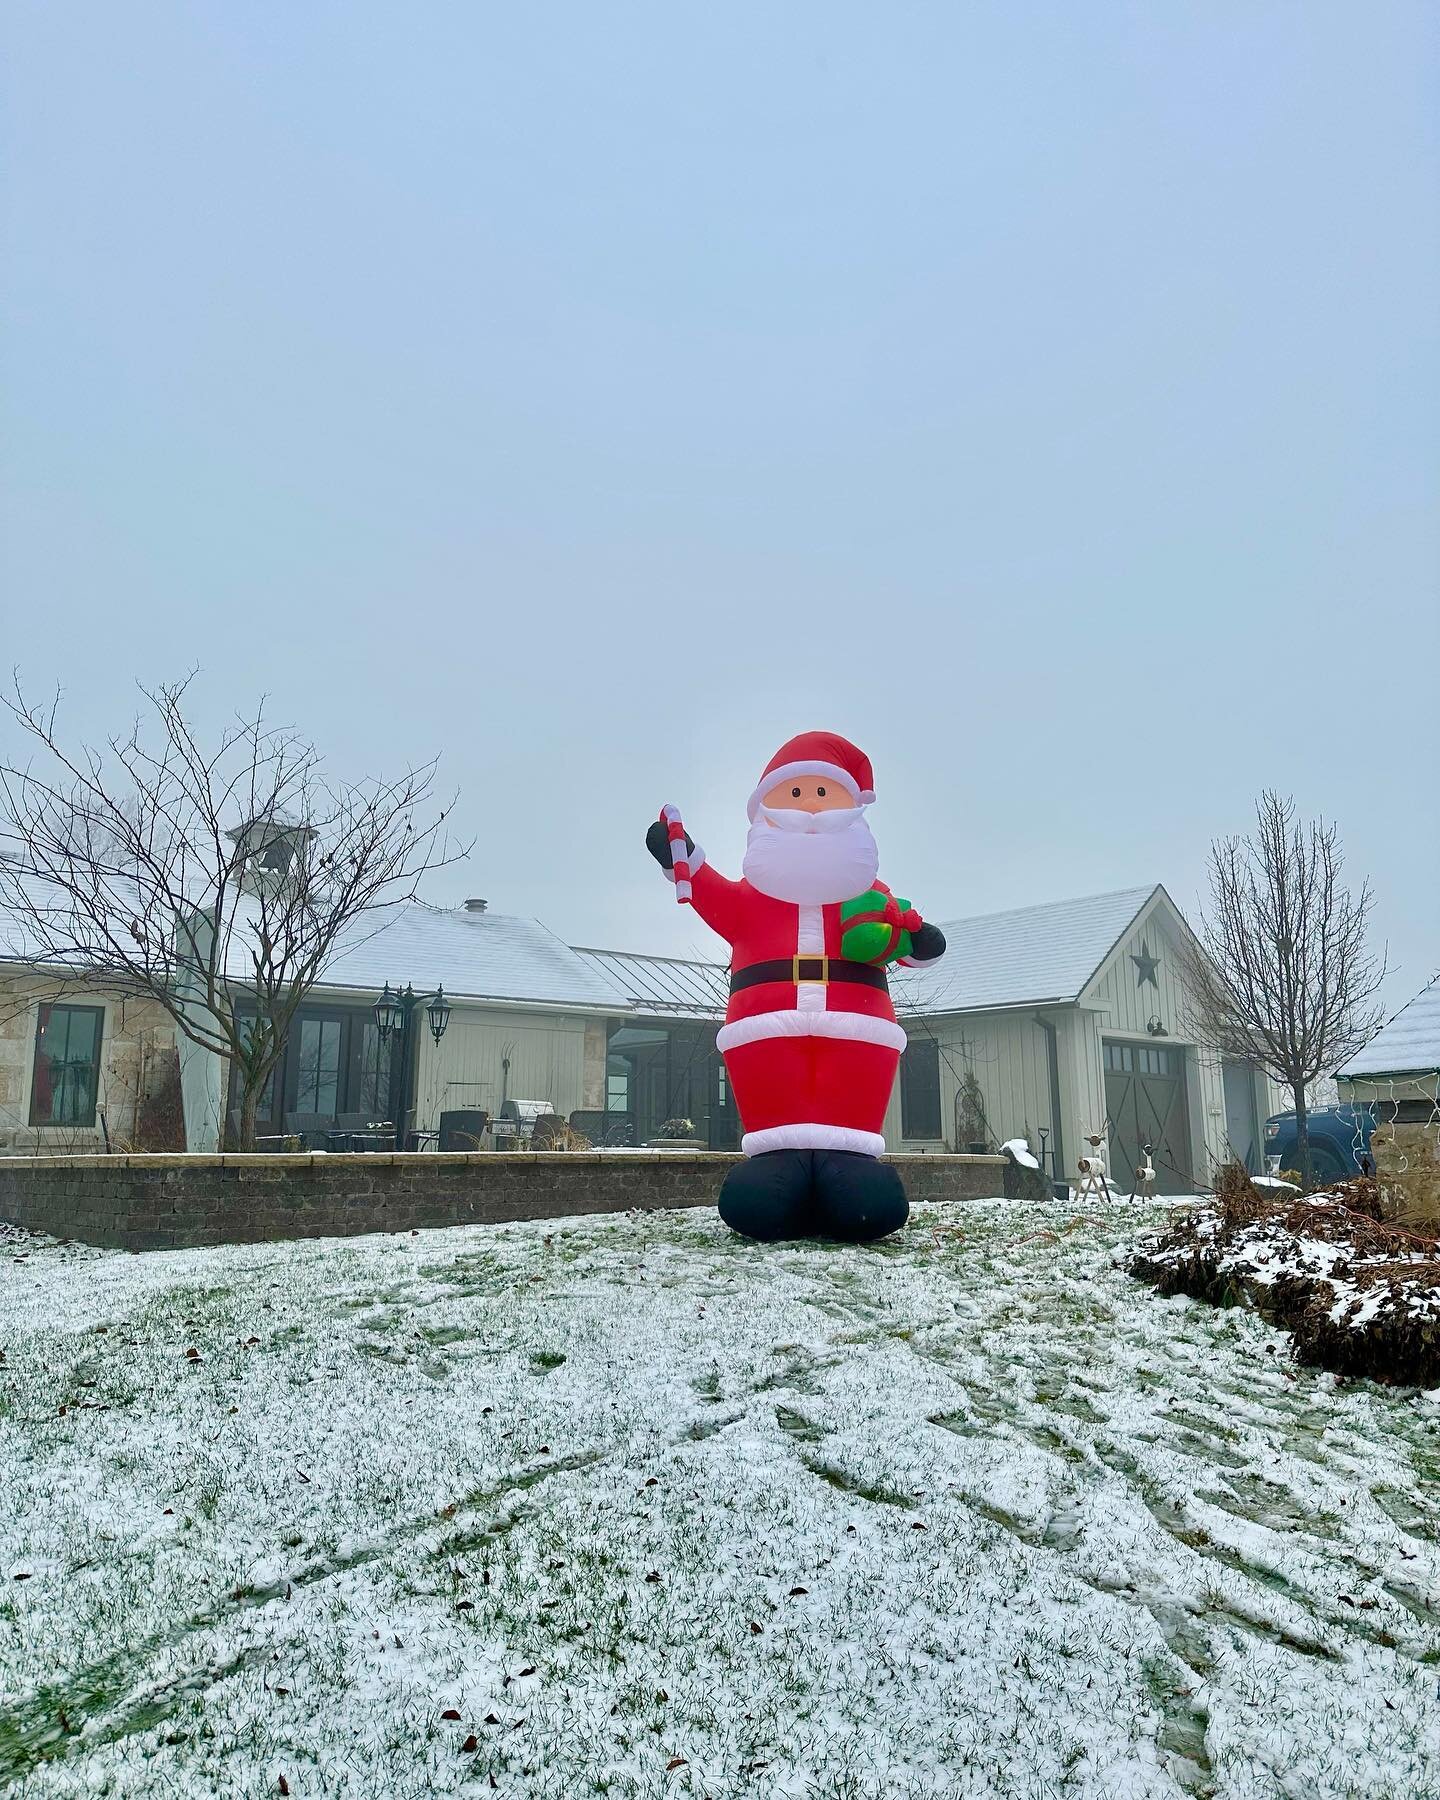 Why buy a small inflatable Santa when you can get a 12' tall one?! Wishing everyone a happy holiday season!